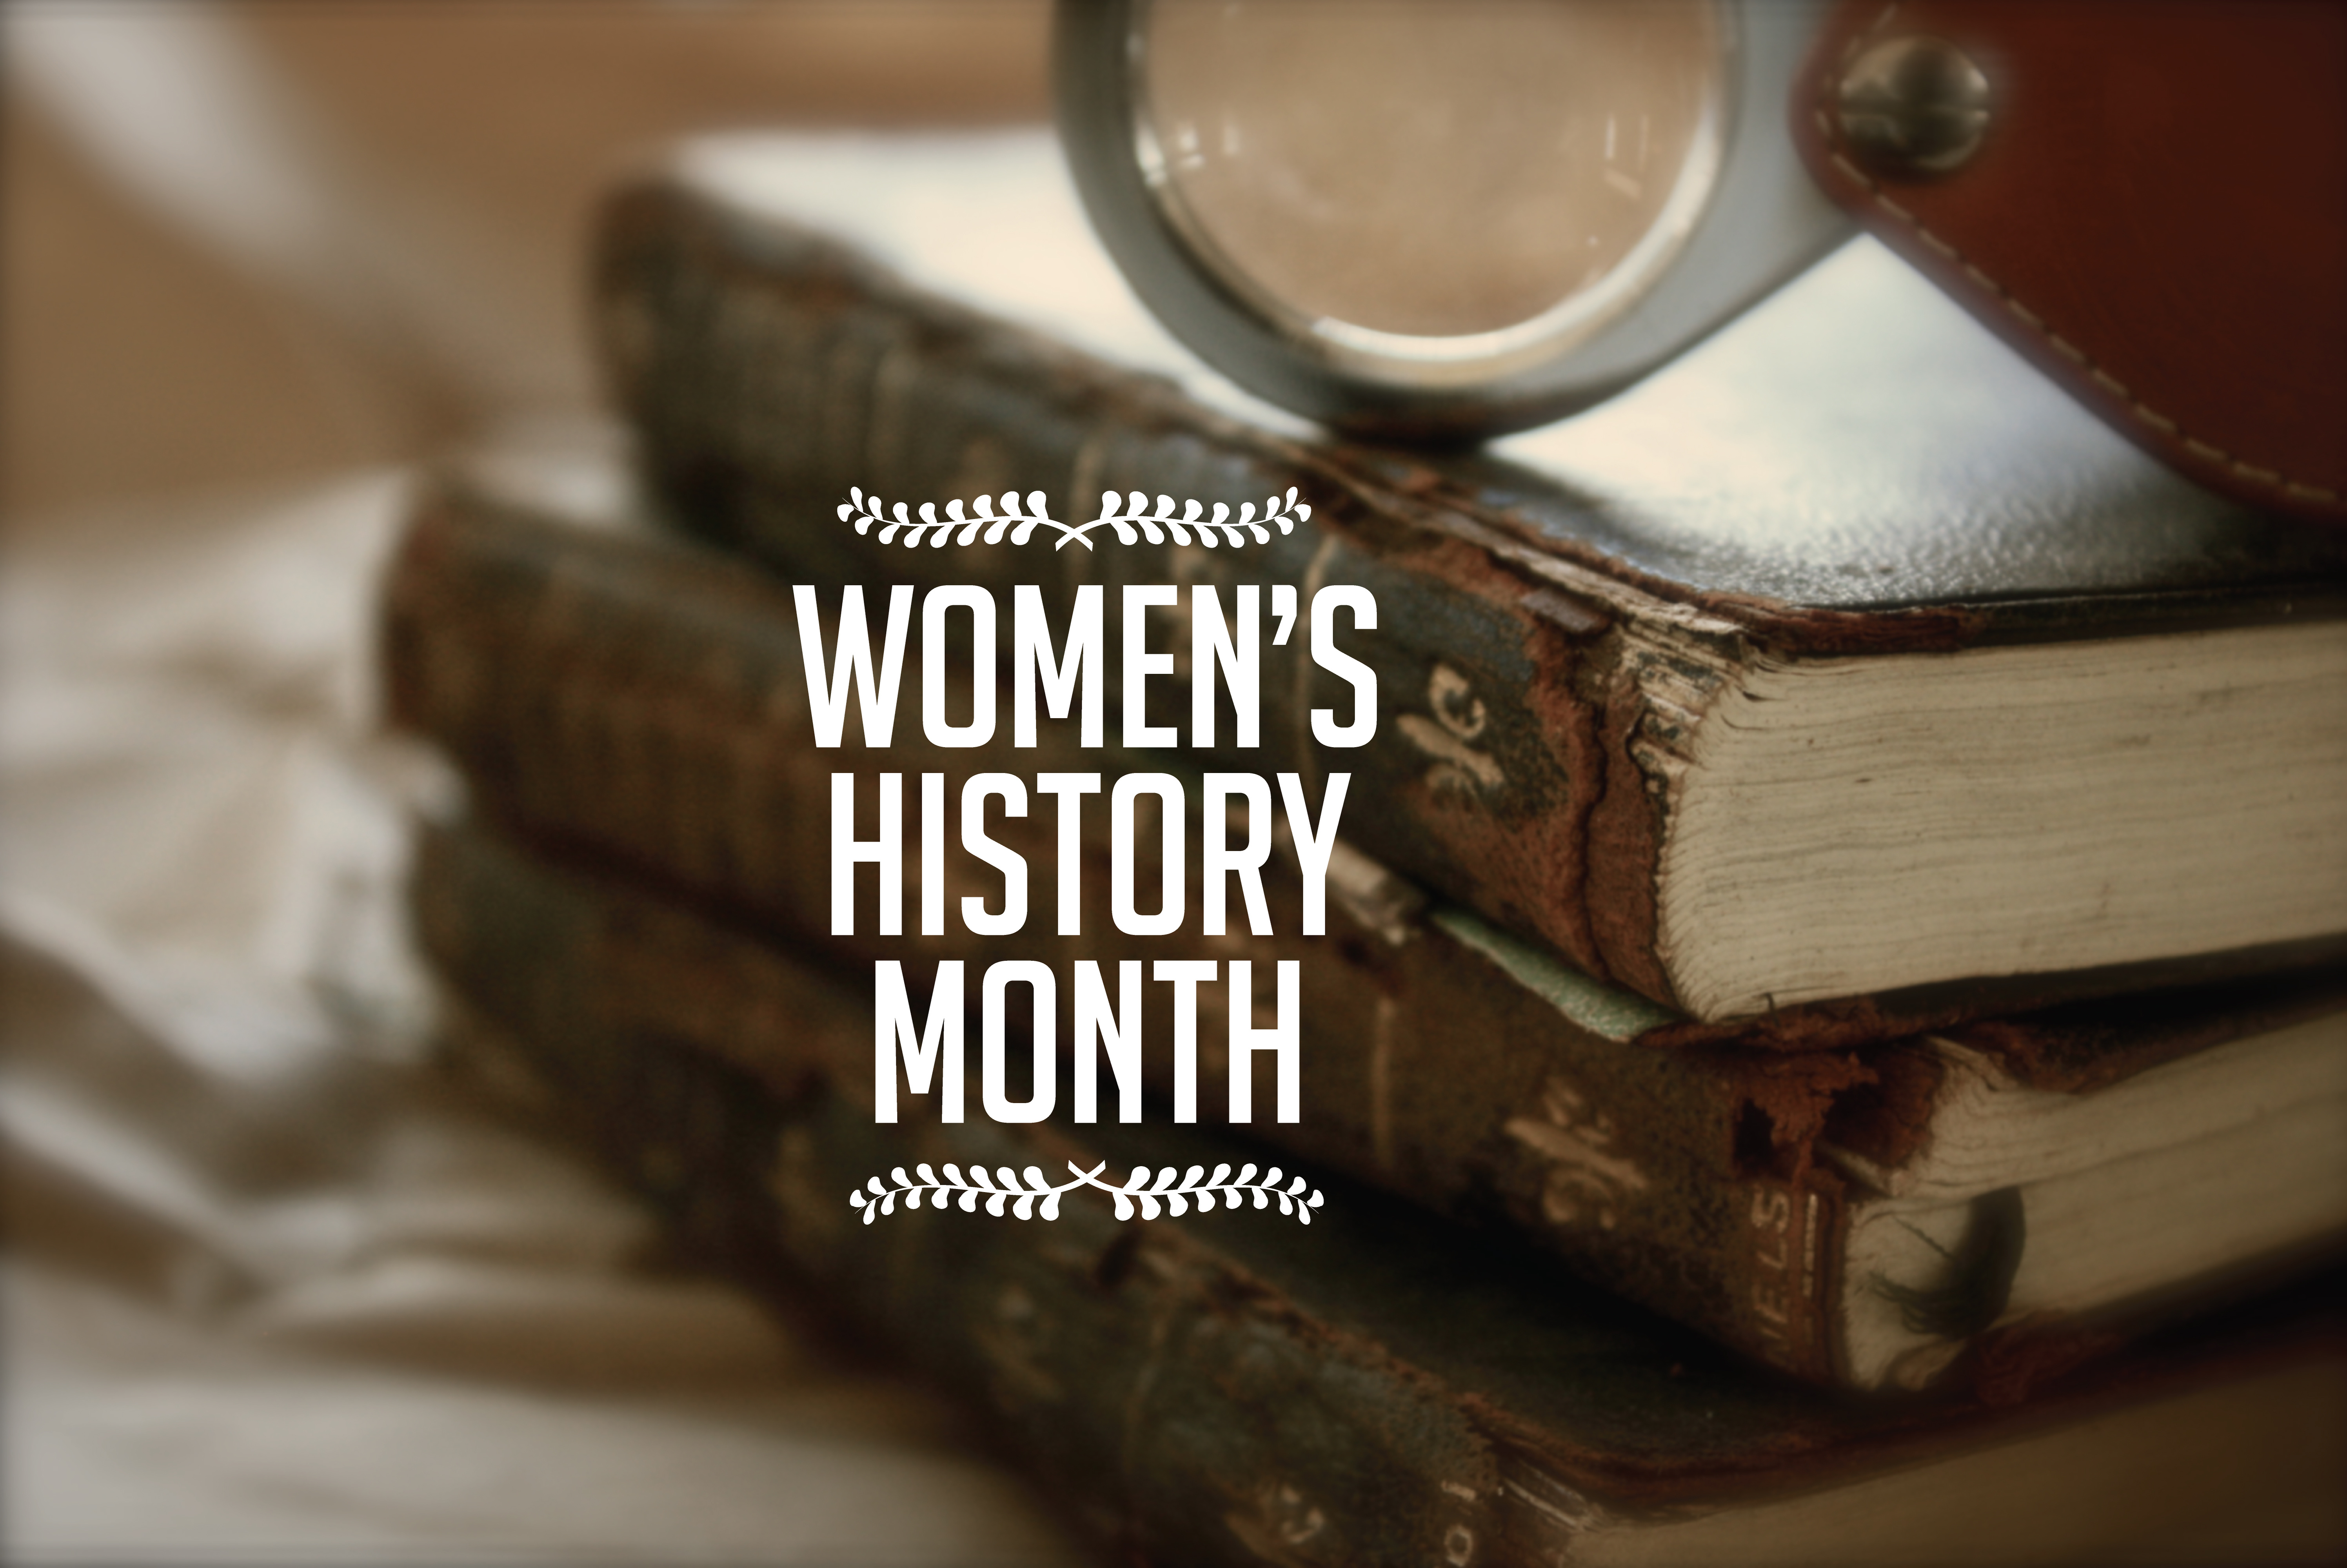 Photograph of books with text overlay "Women's History Month"